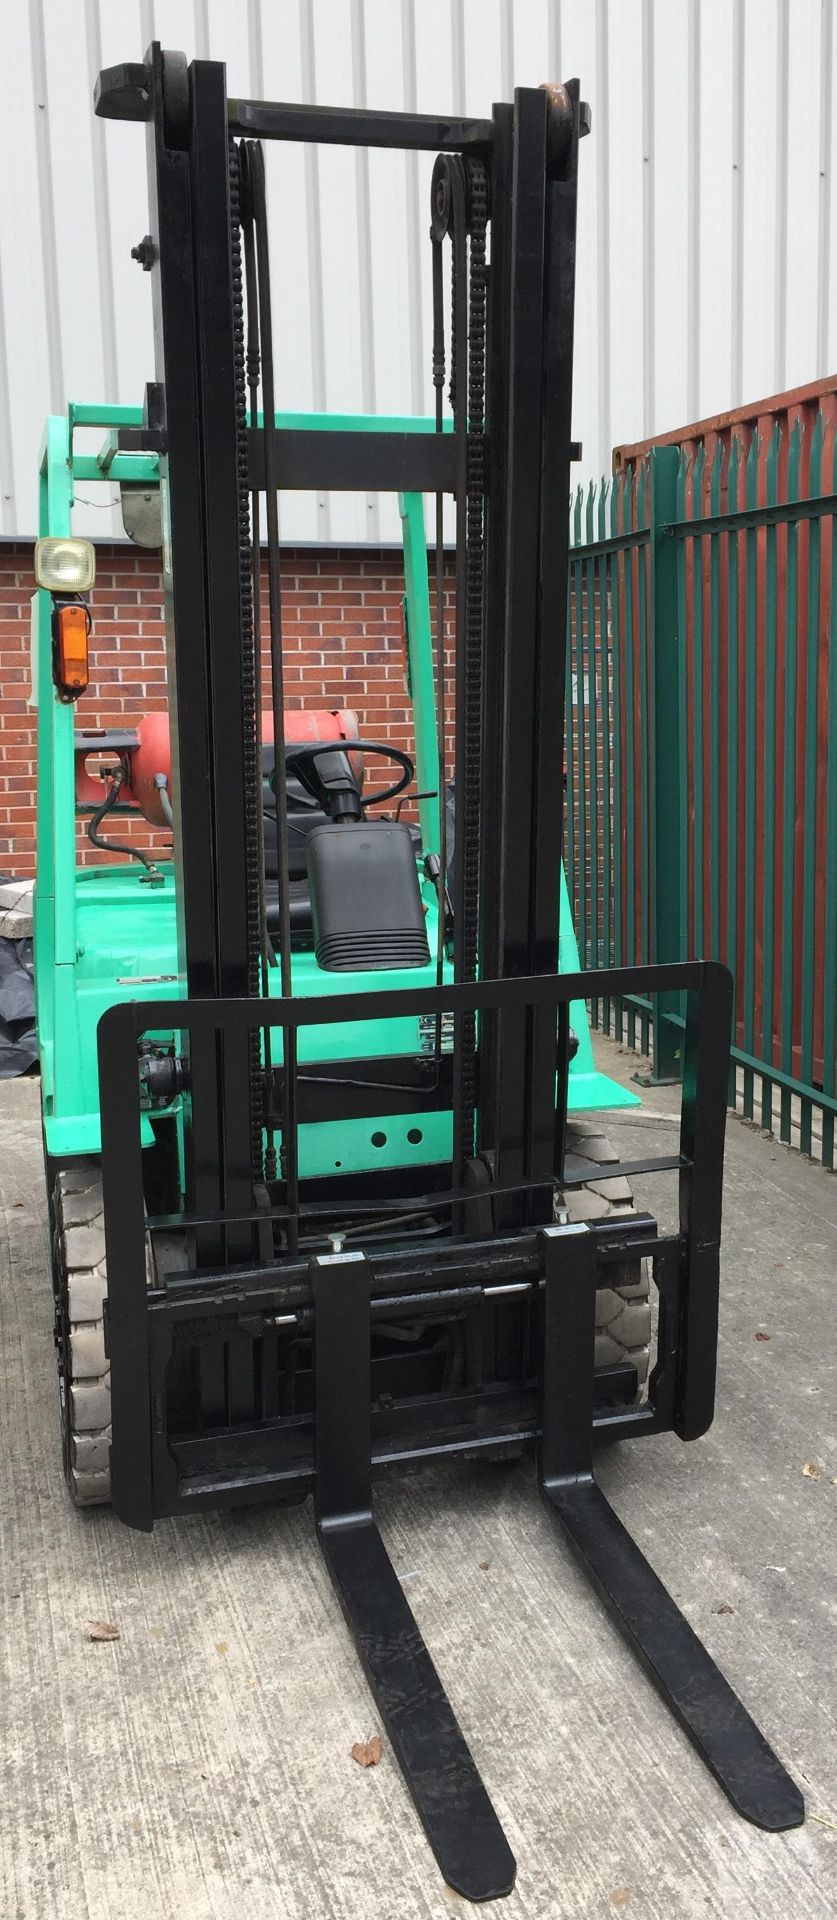 A MITSUBISHI FG20 TWO TONNE GAS FORKLIFT TRUCK with Cascade side shift - colour green.